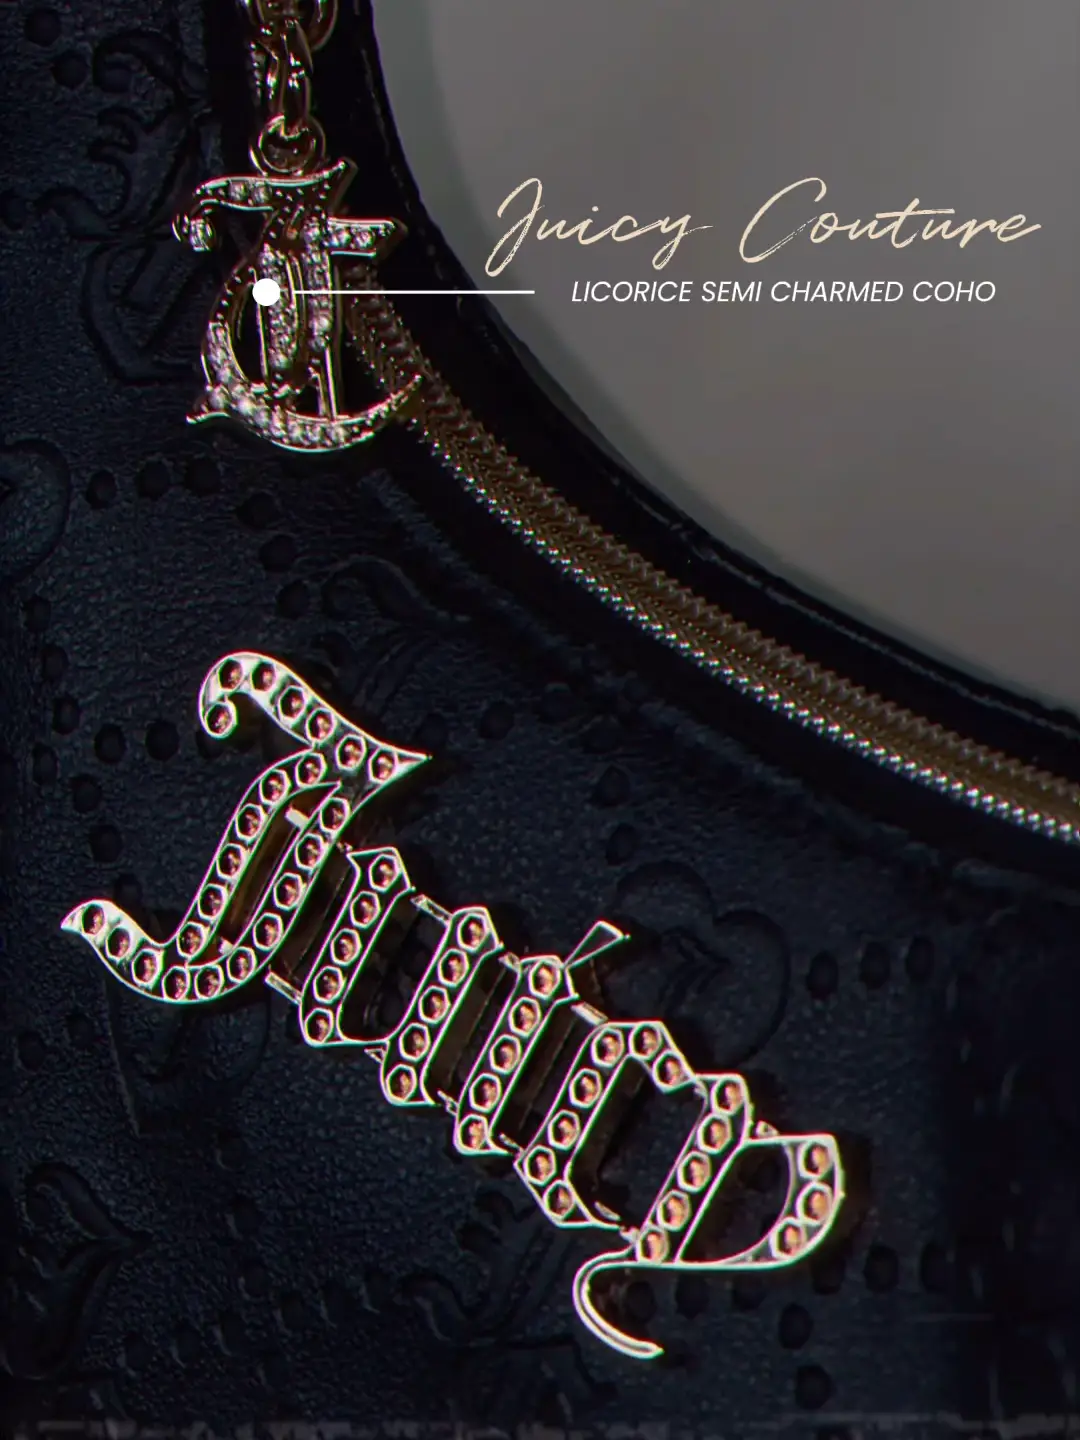 these new @Juicy Couture bags at @T.J.Maxx are giving vintage y2k juic, TJ  Maxx Finds